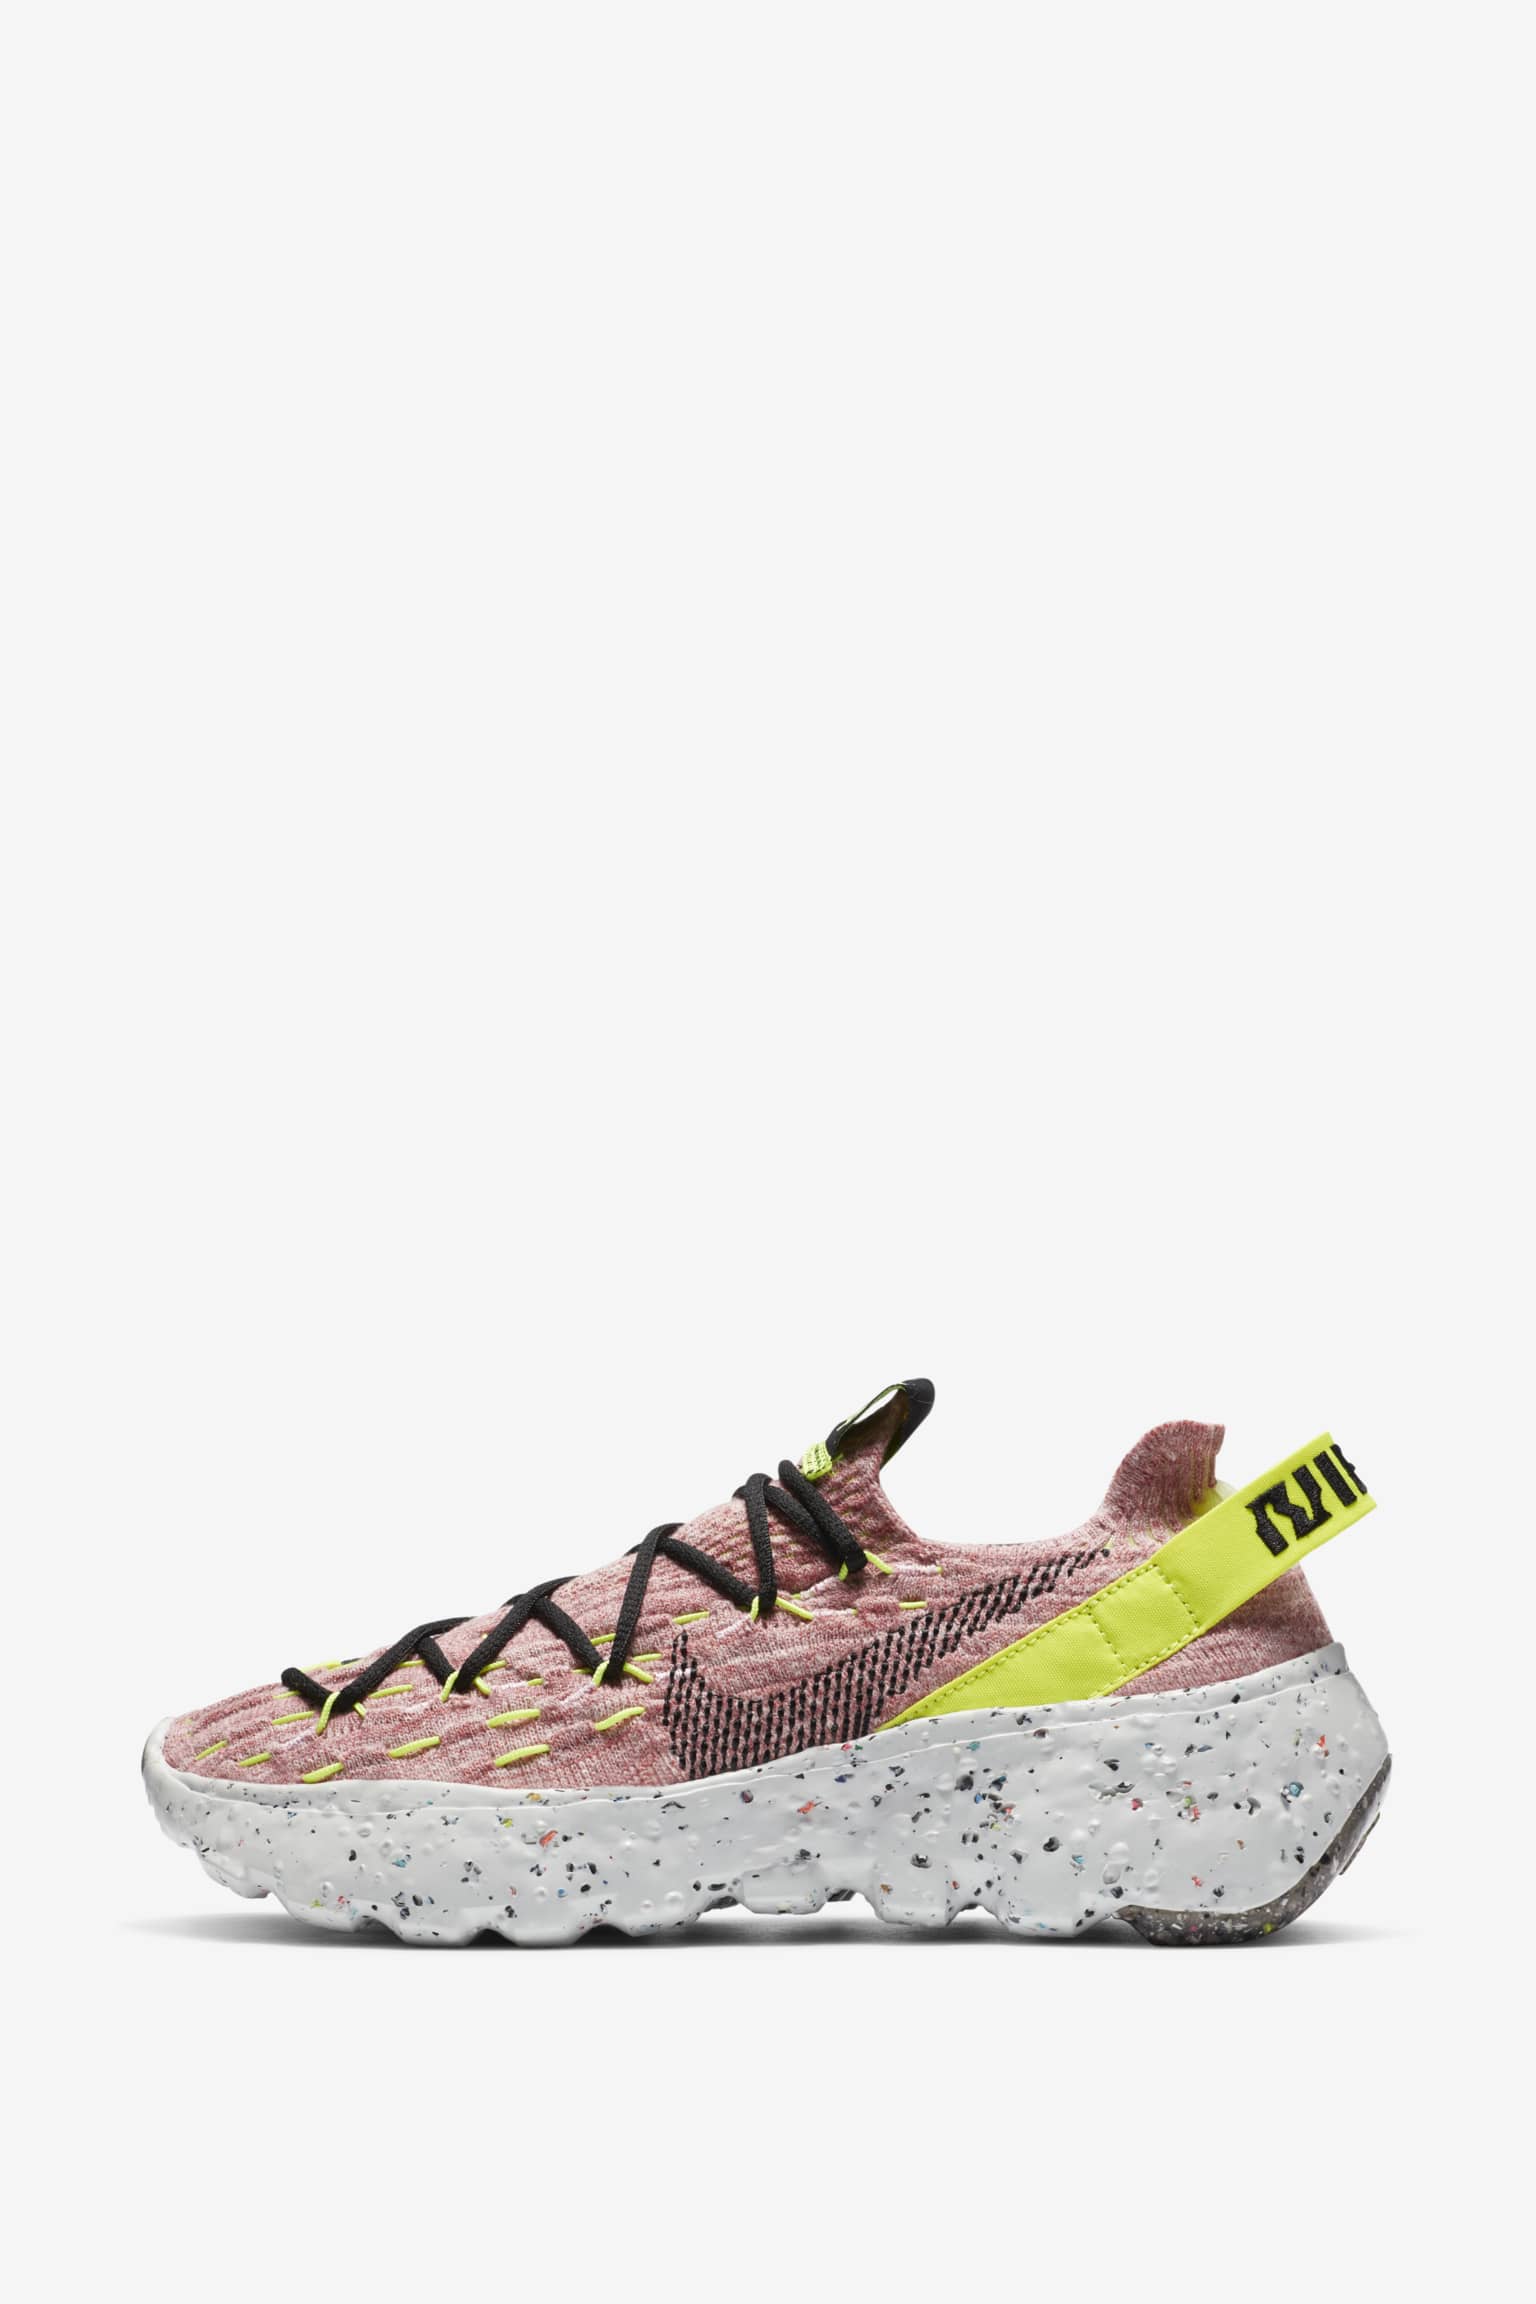 snkrs space hippie